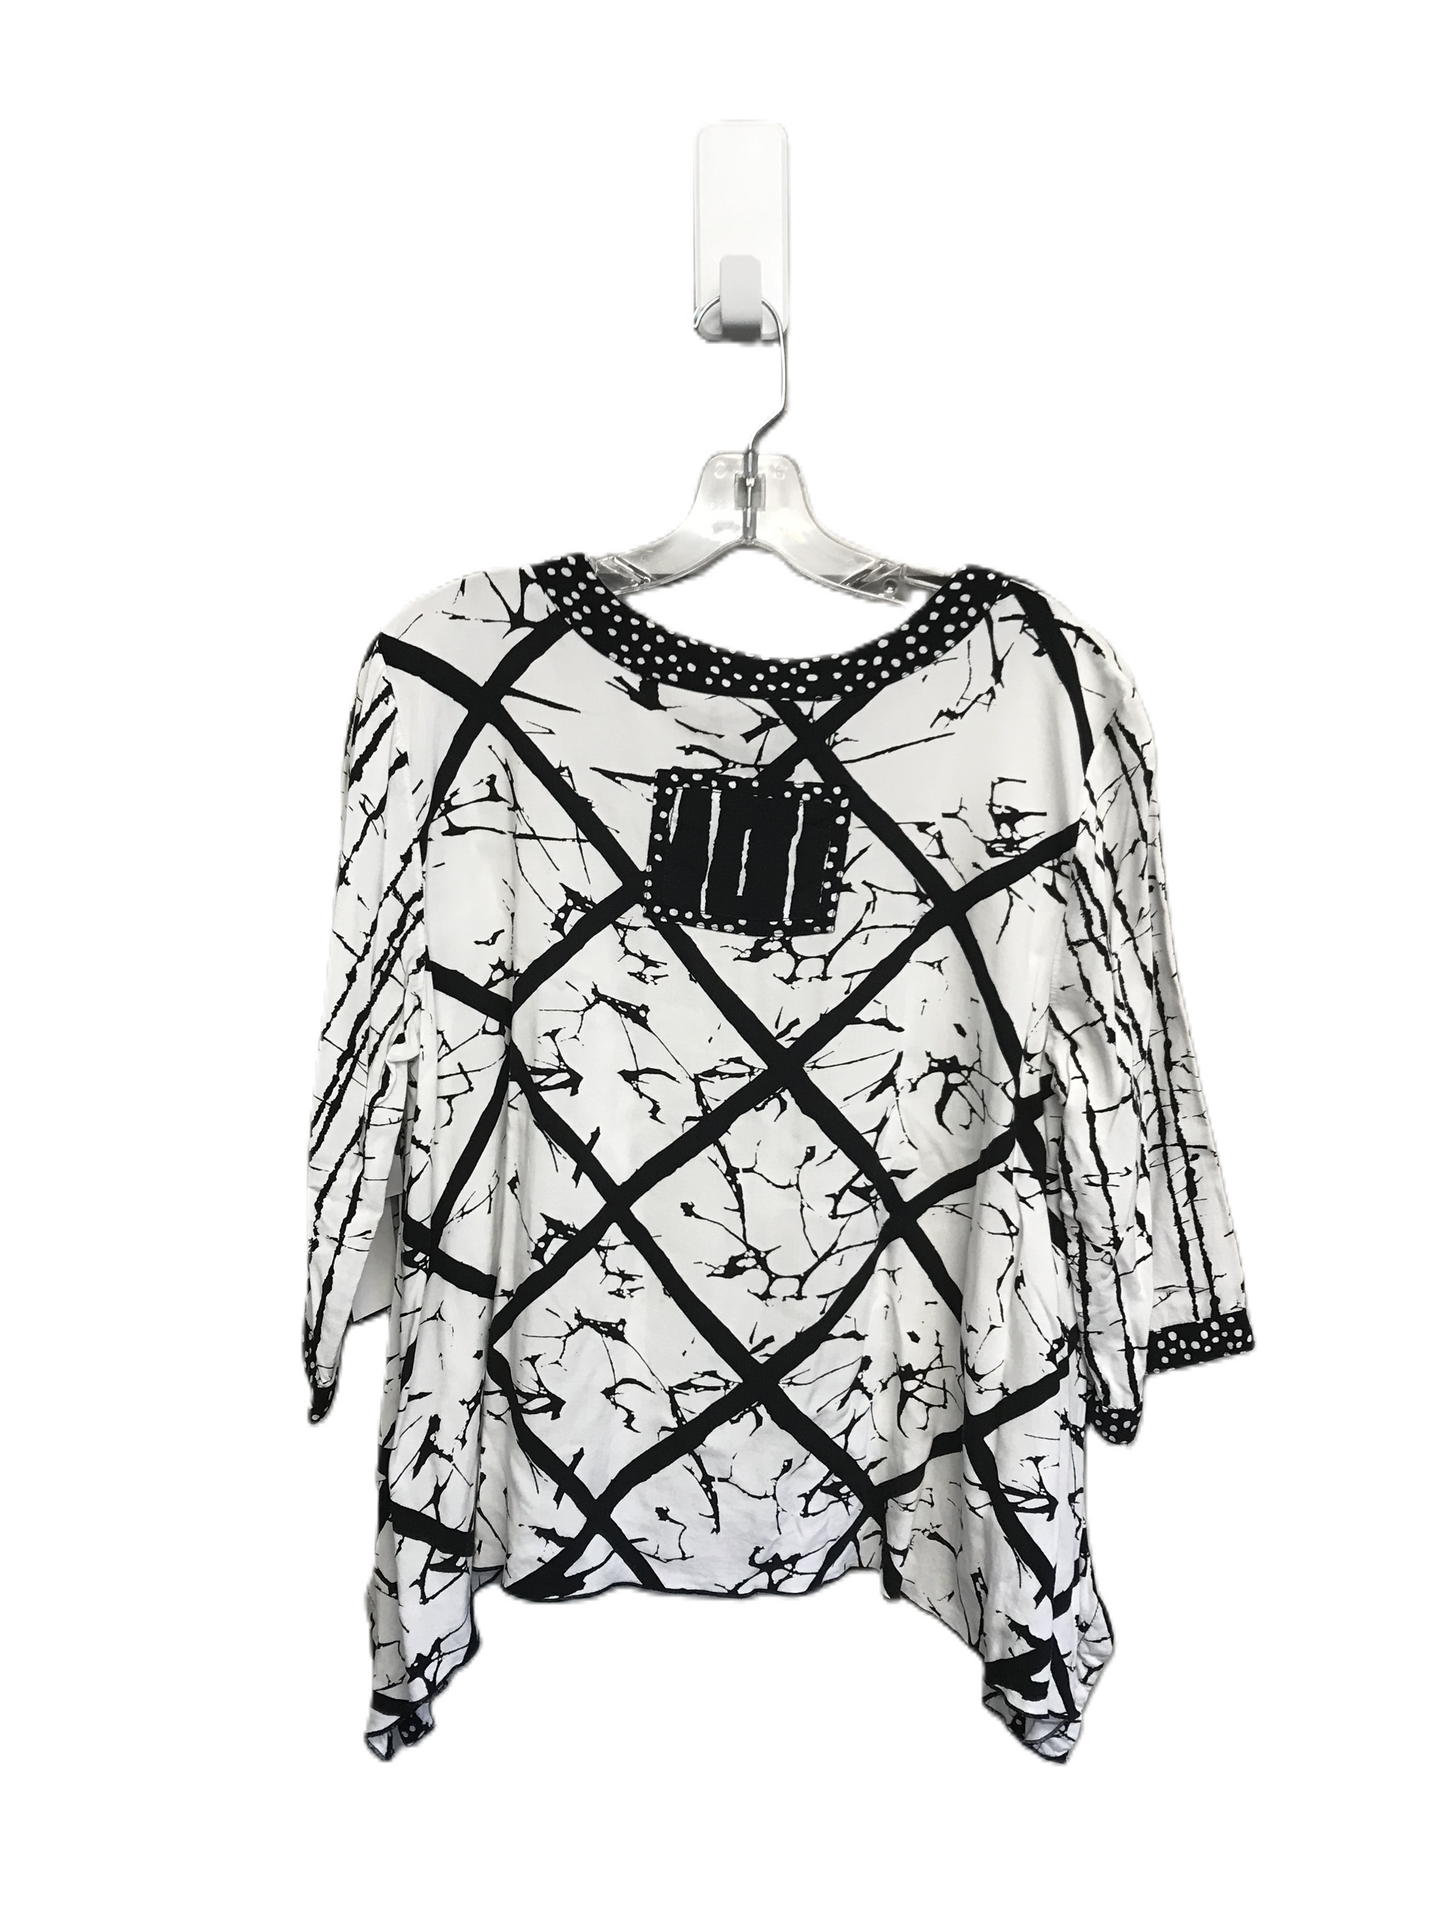 Black & White Top Short Sleeve By Ali Miles, Size: L